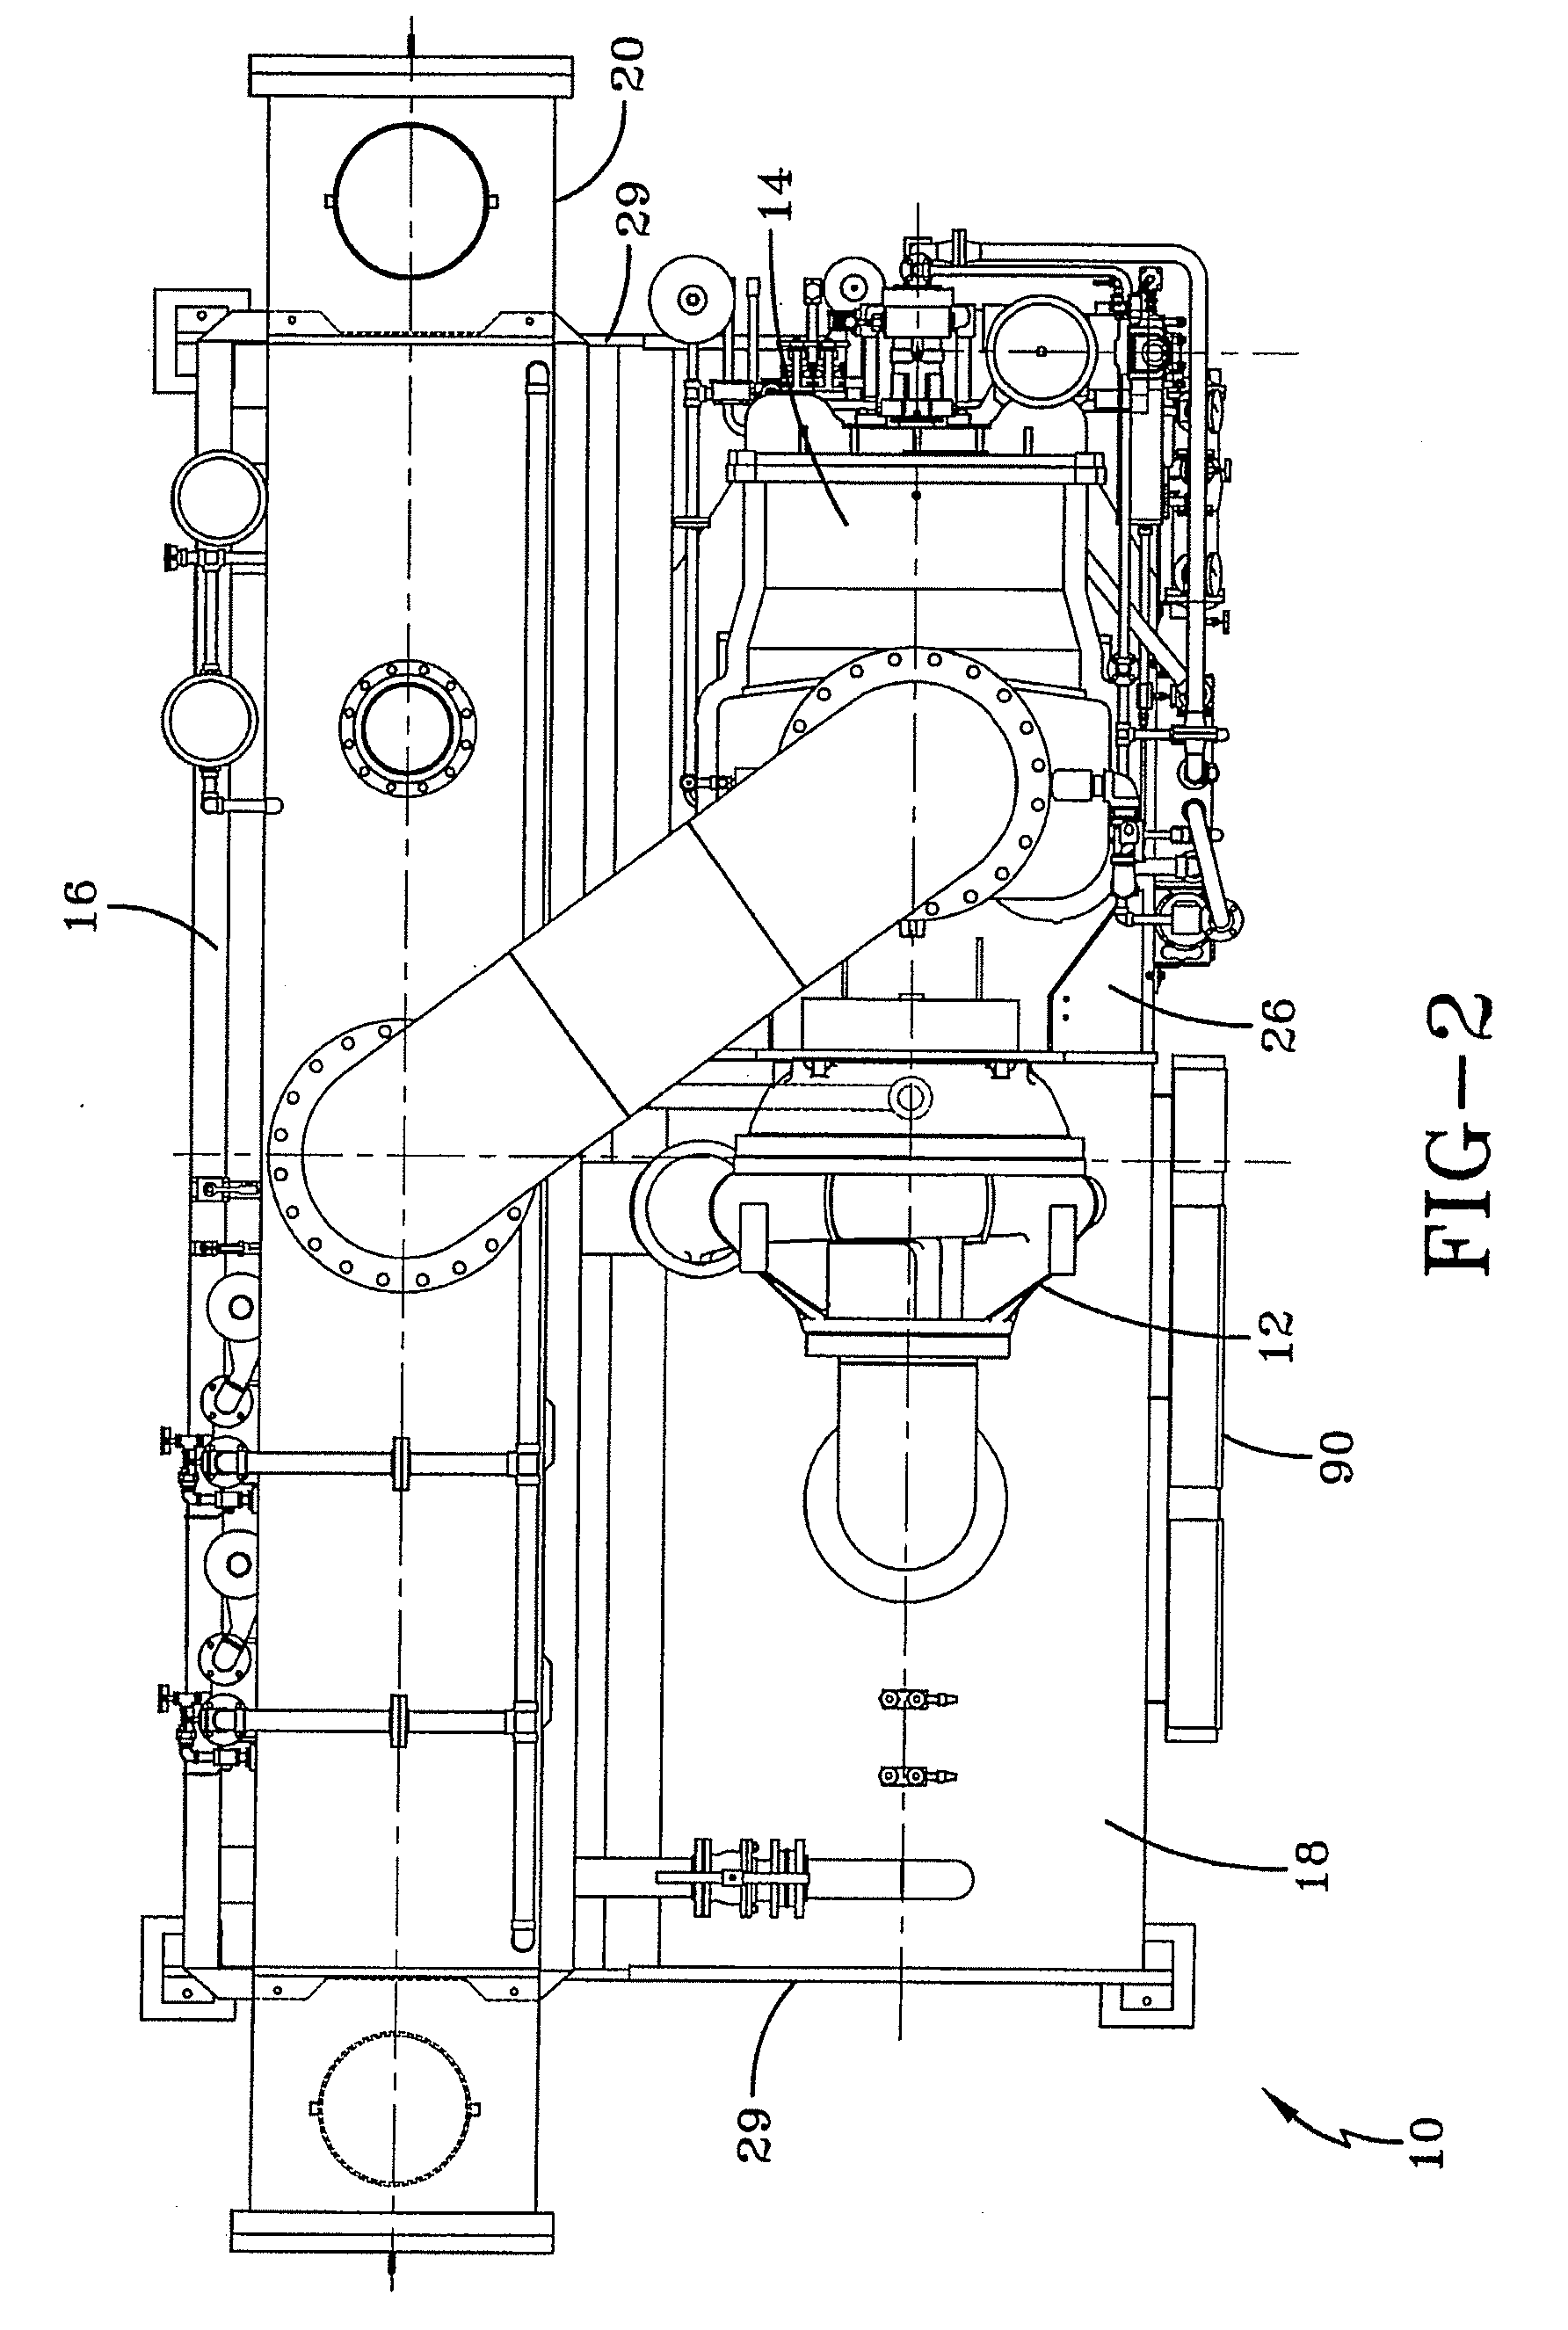 Automated inlet steam supply valve controls for a steam turbine powered chiller unit